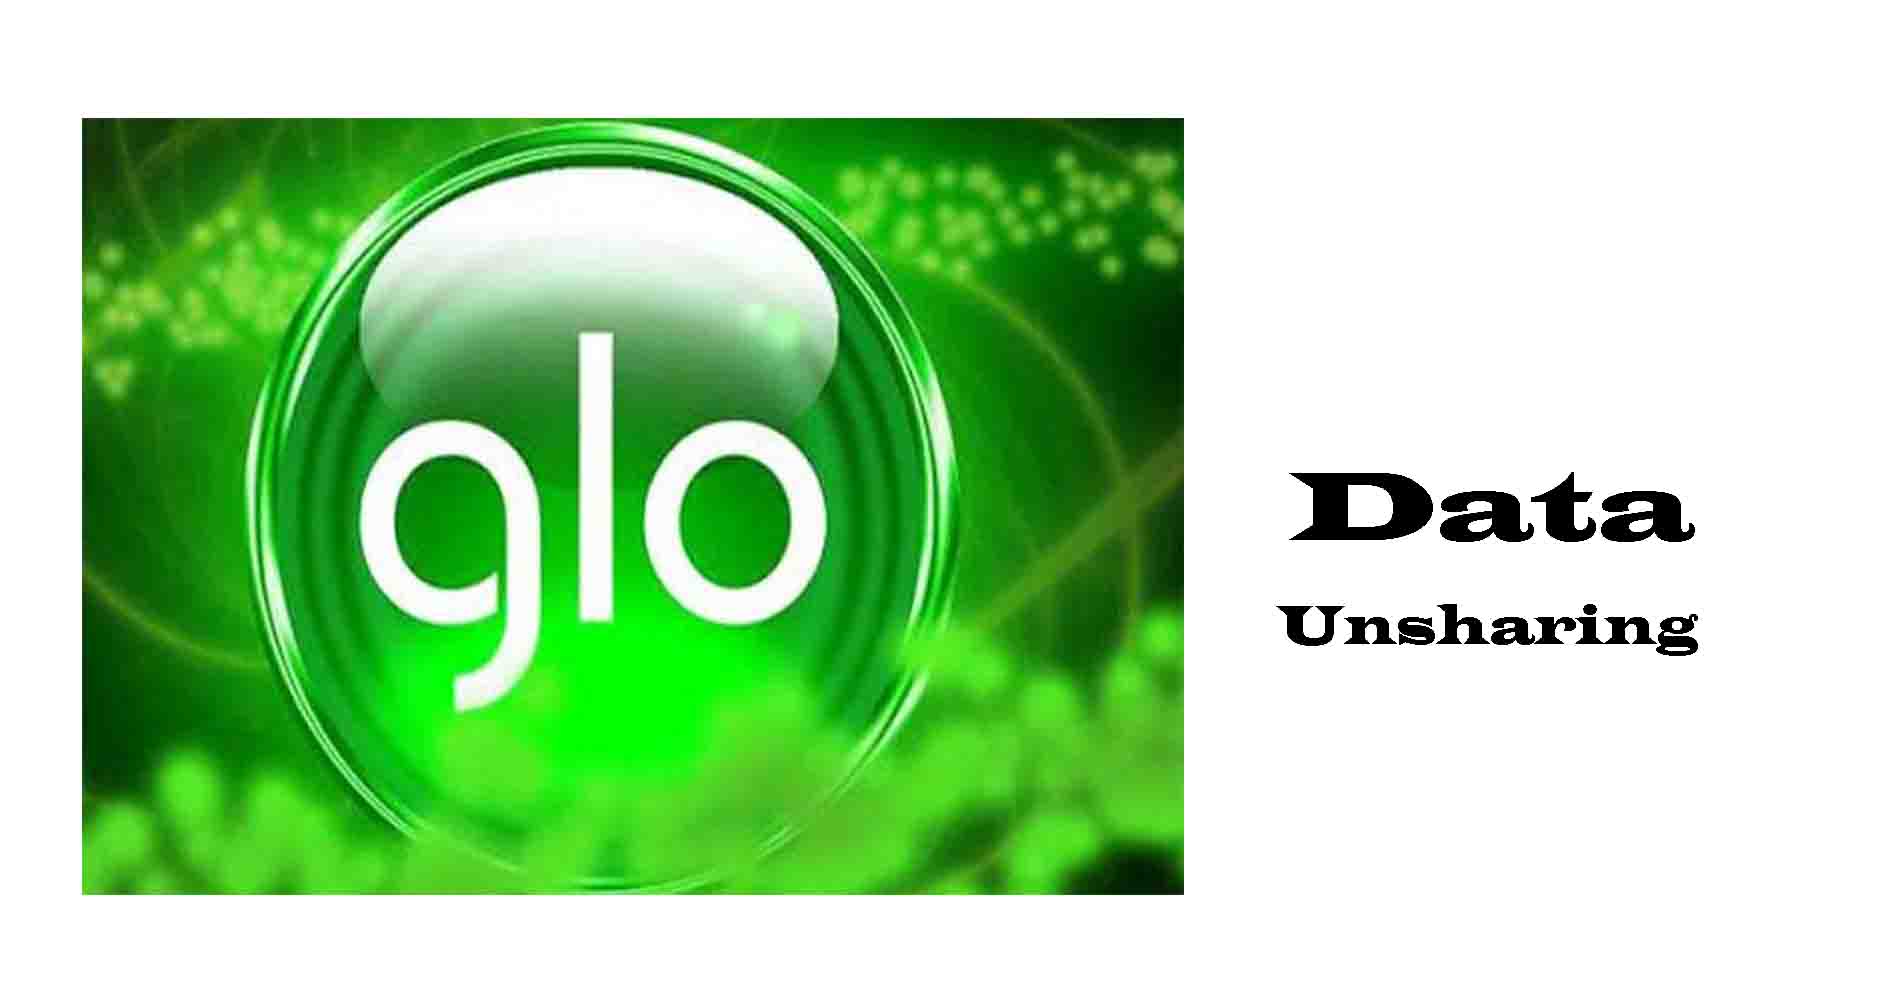 How to unshare glo data plans